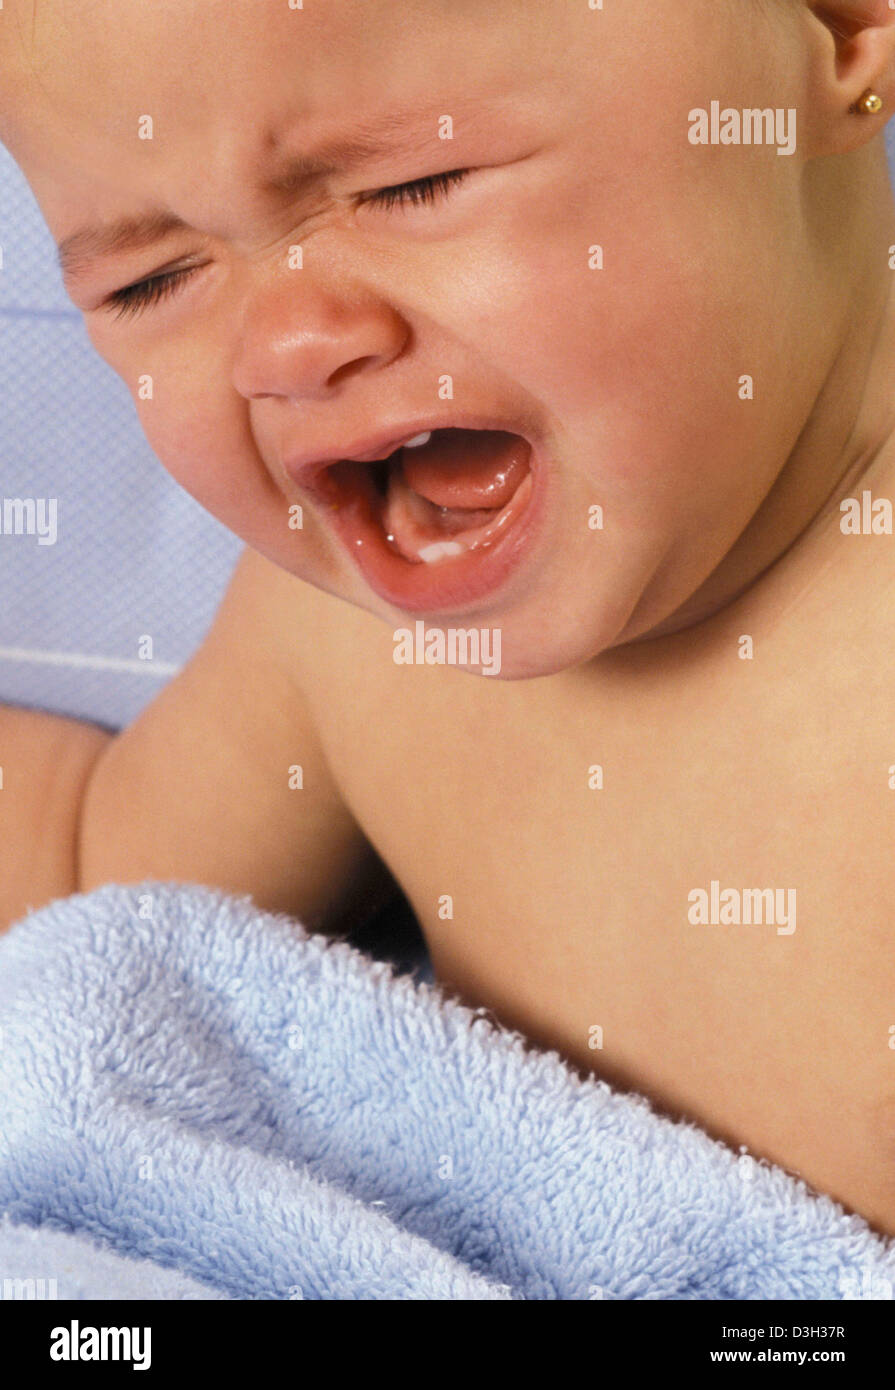 1-3 YEARS OLD BABY CRYING Stock Photo